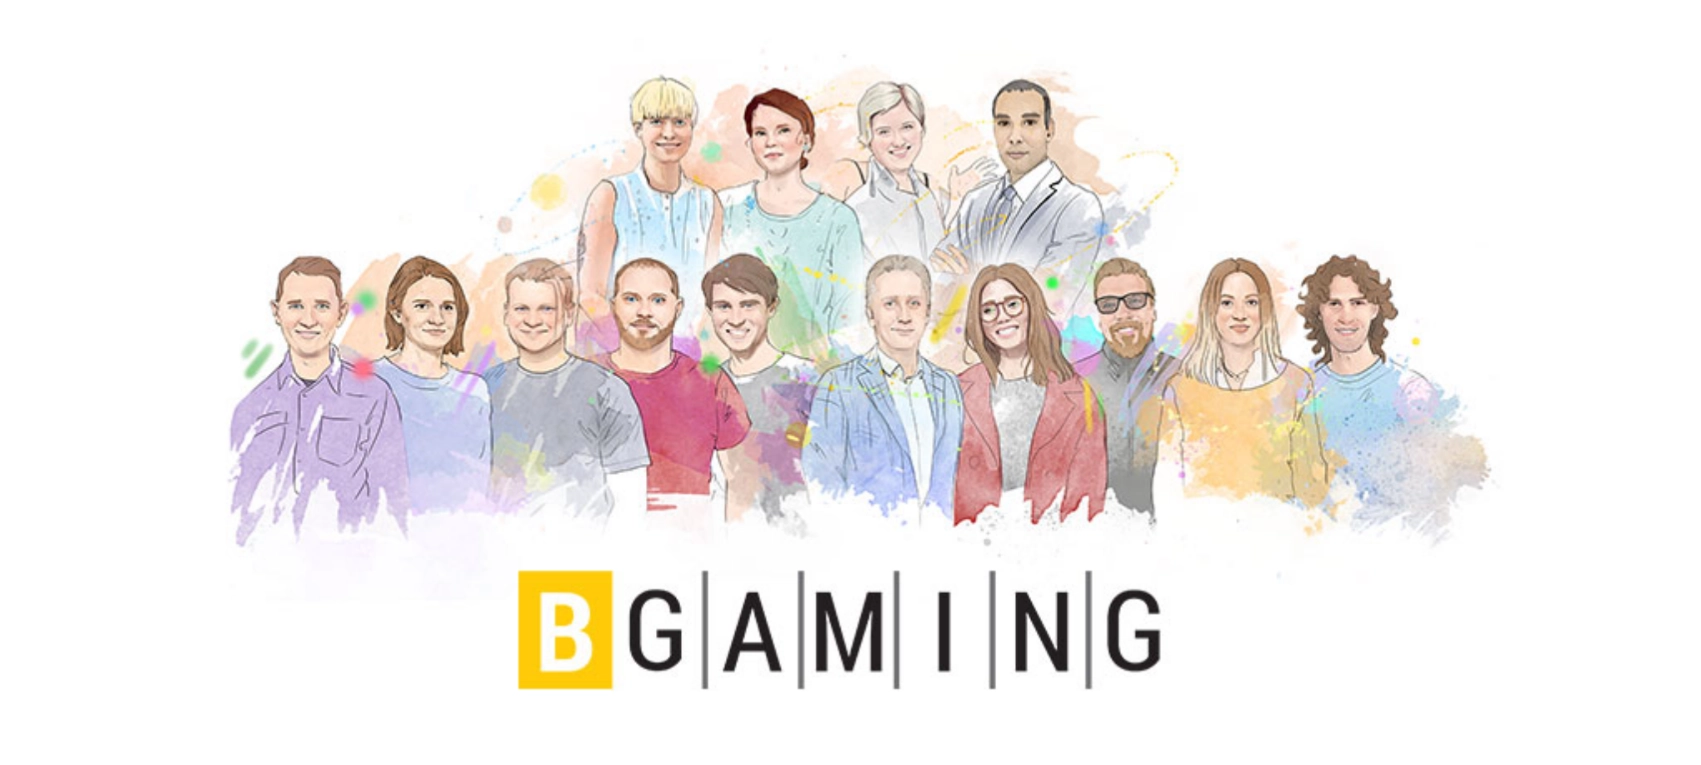 Interview With BGaming's Director, Marina Ostrovtsova